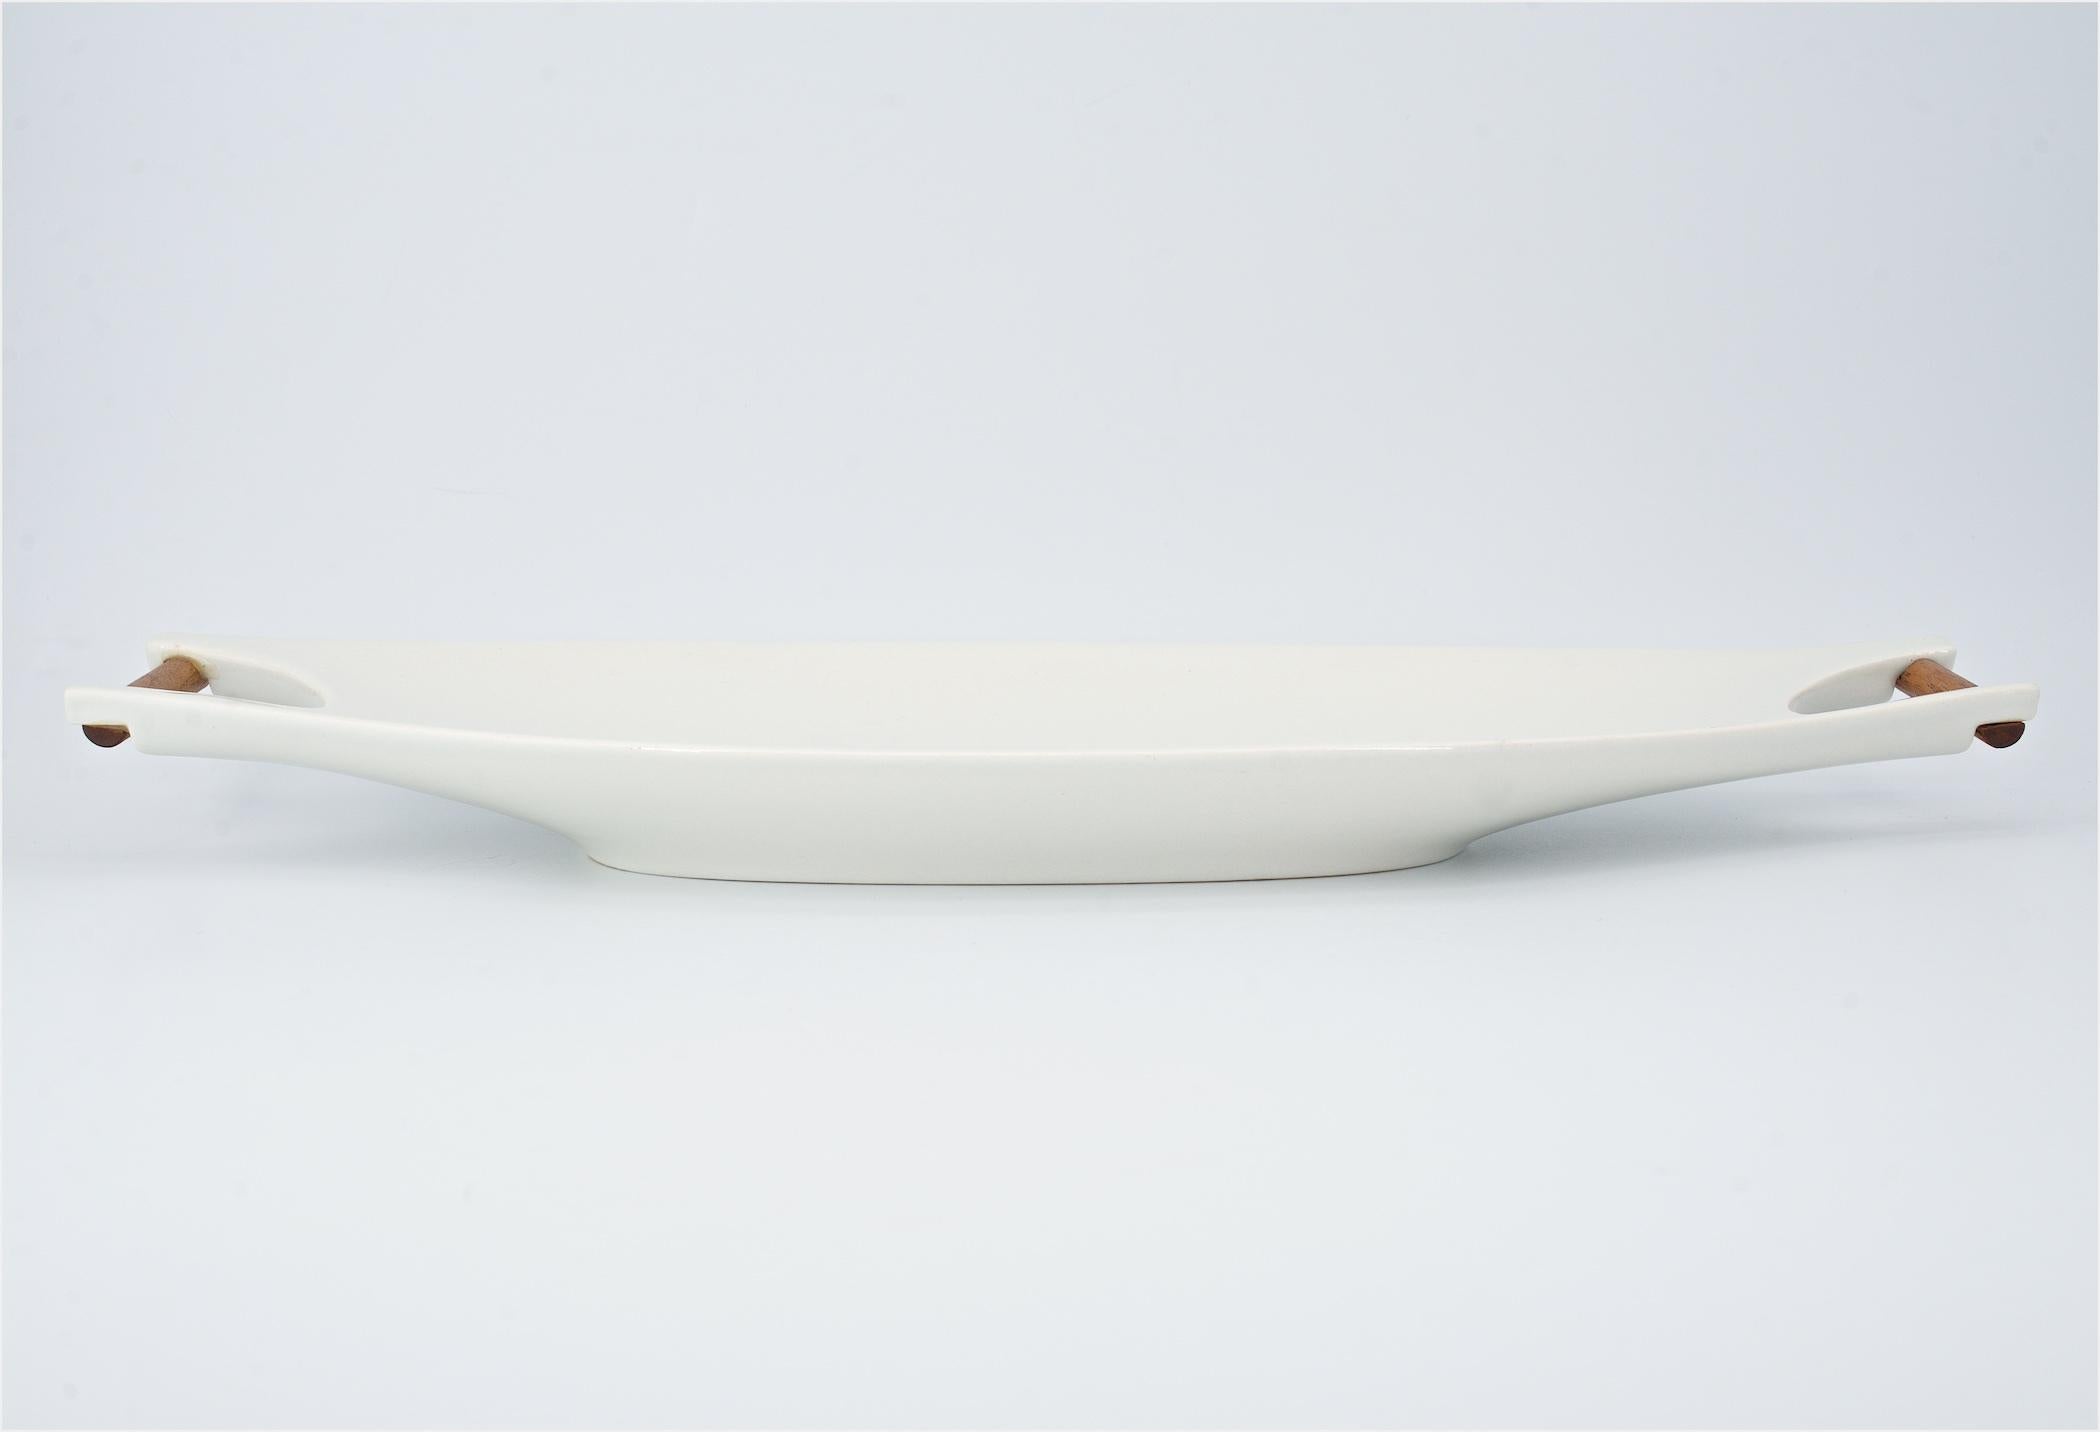 1950s Capri White Pottery + Walnut Serving Tray Mid-Century Modernist Tableware In Good Condition For Sale In Hyattsville, MD